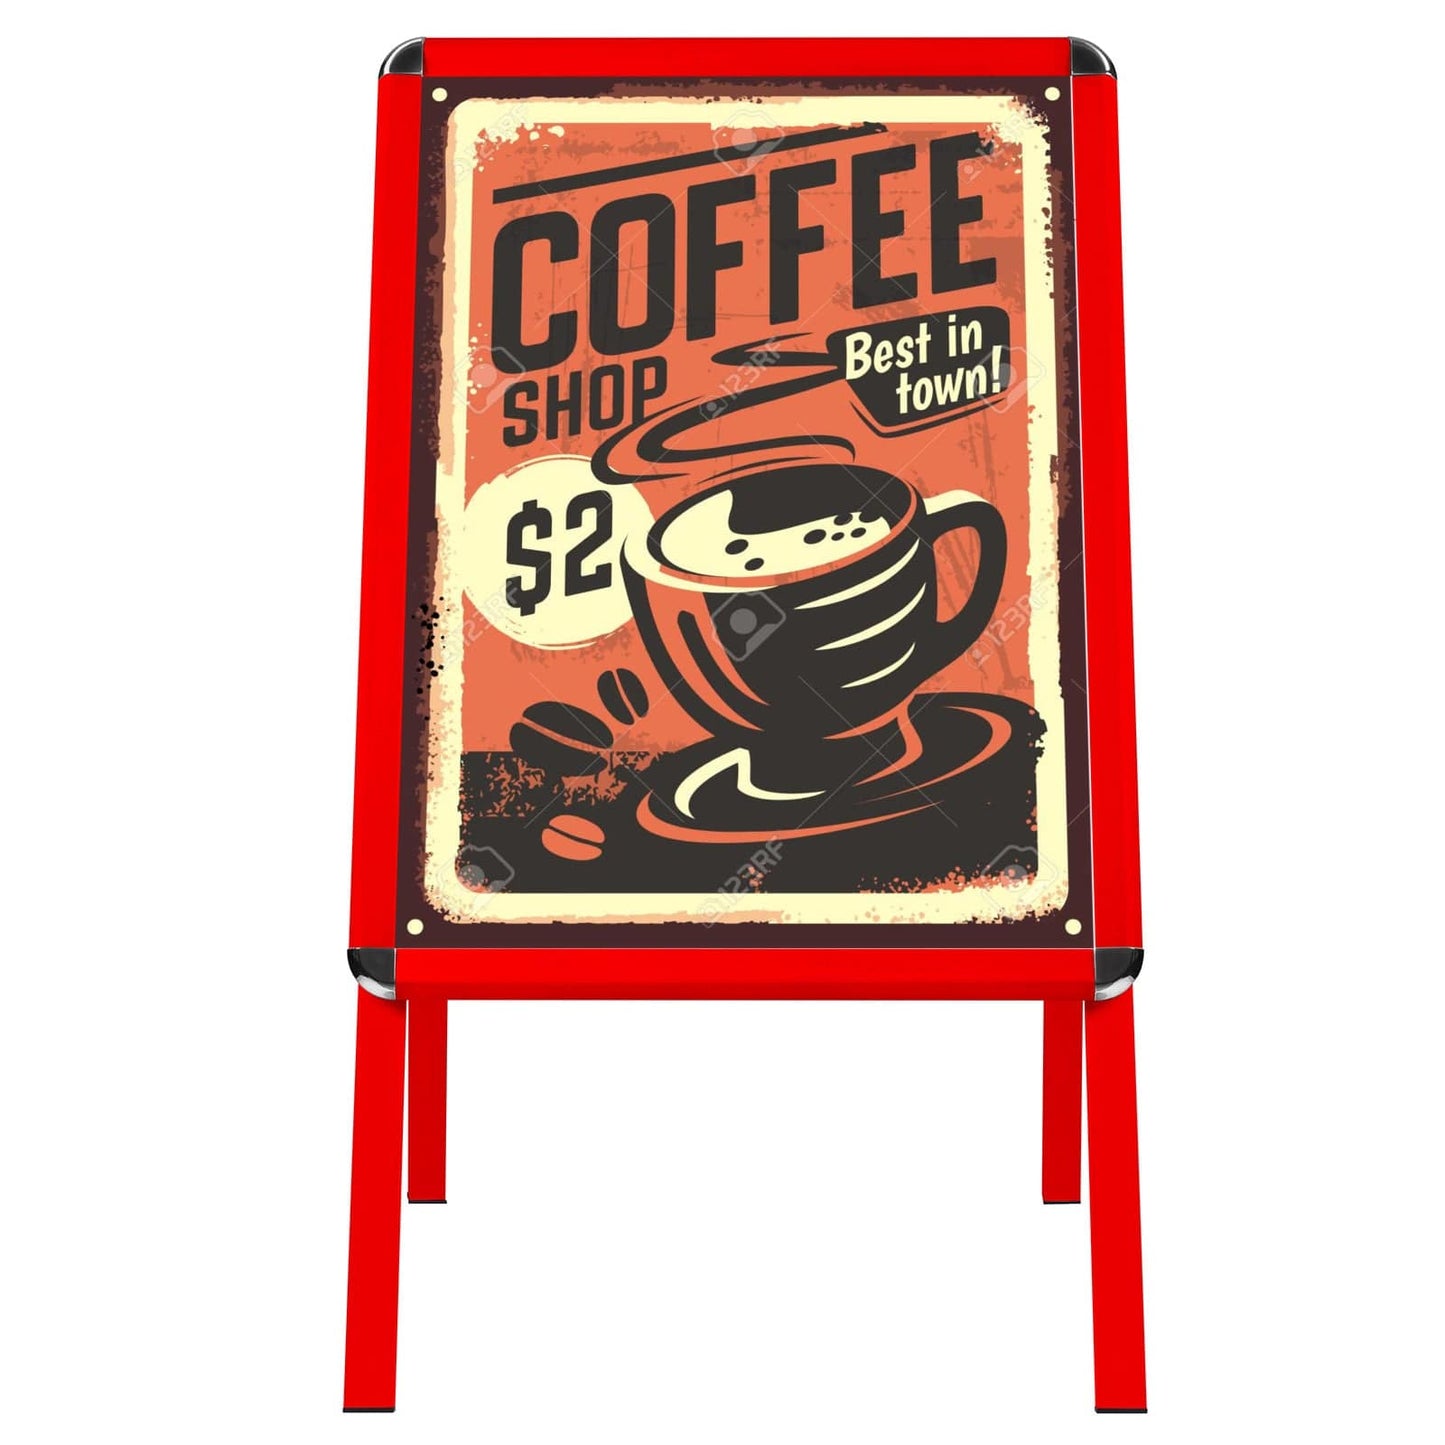 18x24 Red SnapeZo® Sidewalk Sign - 1.25" Profile - Snap Frames Direct